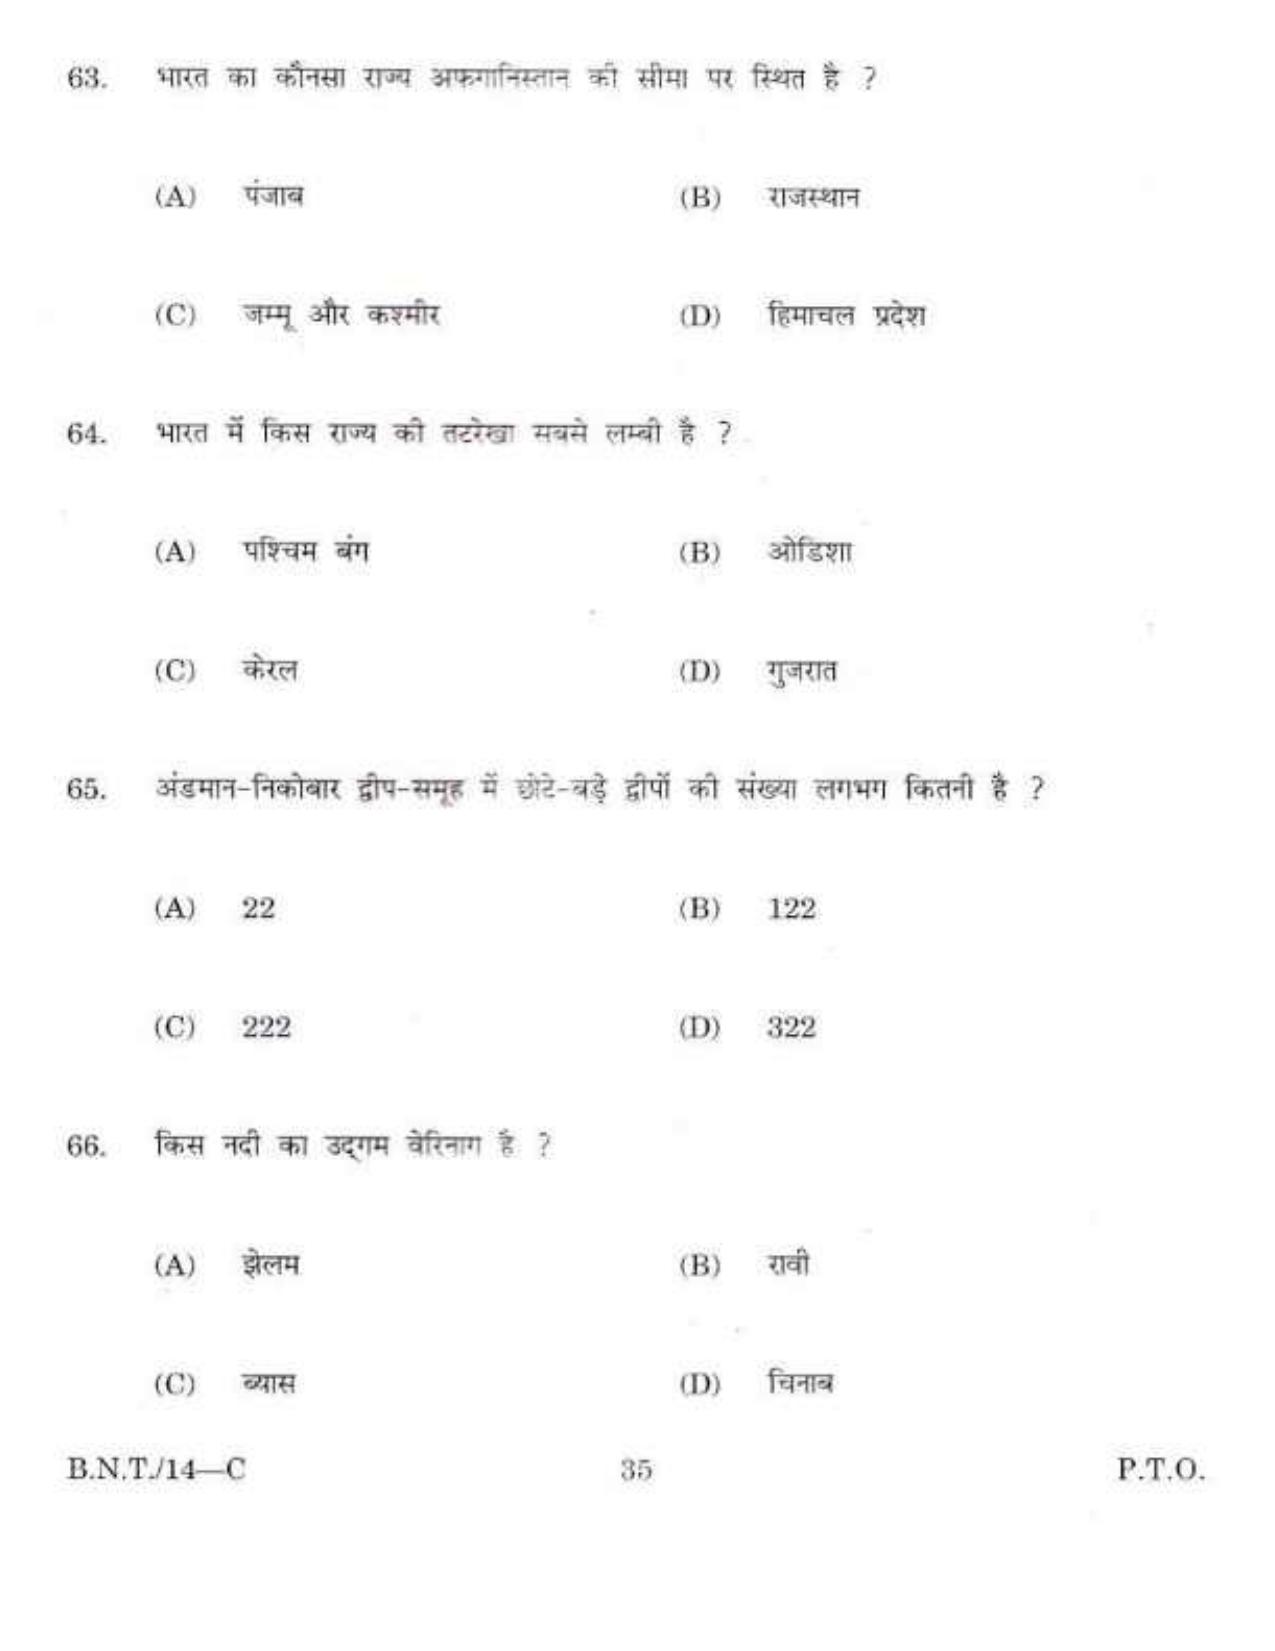 BSMFC Recovery Agent Old Question Papers for General Knowledge - Page 35